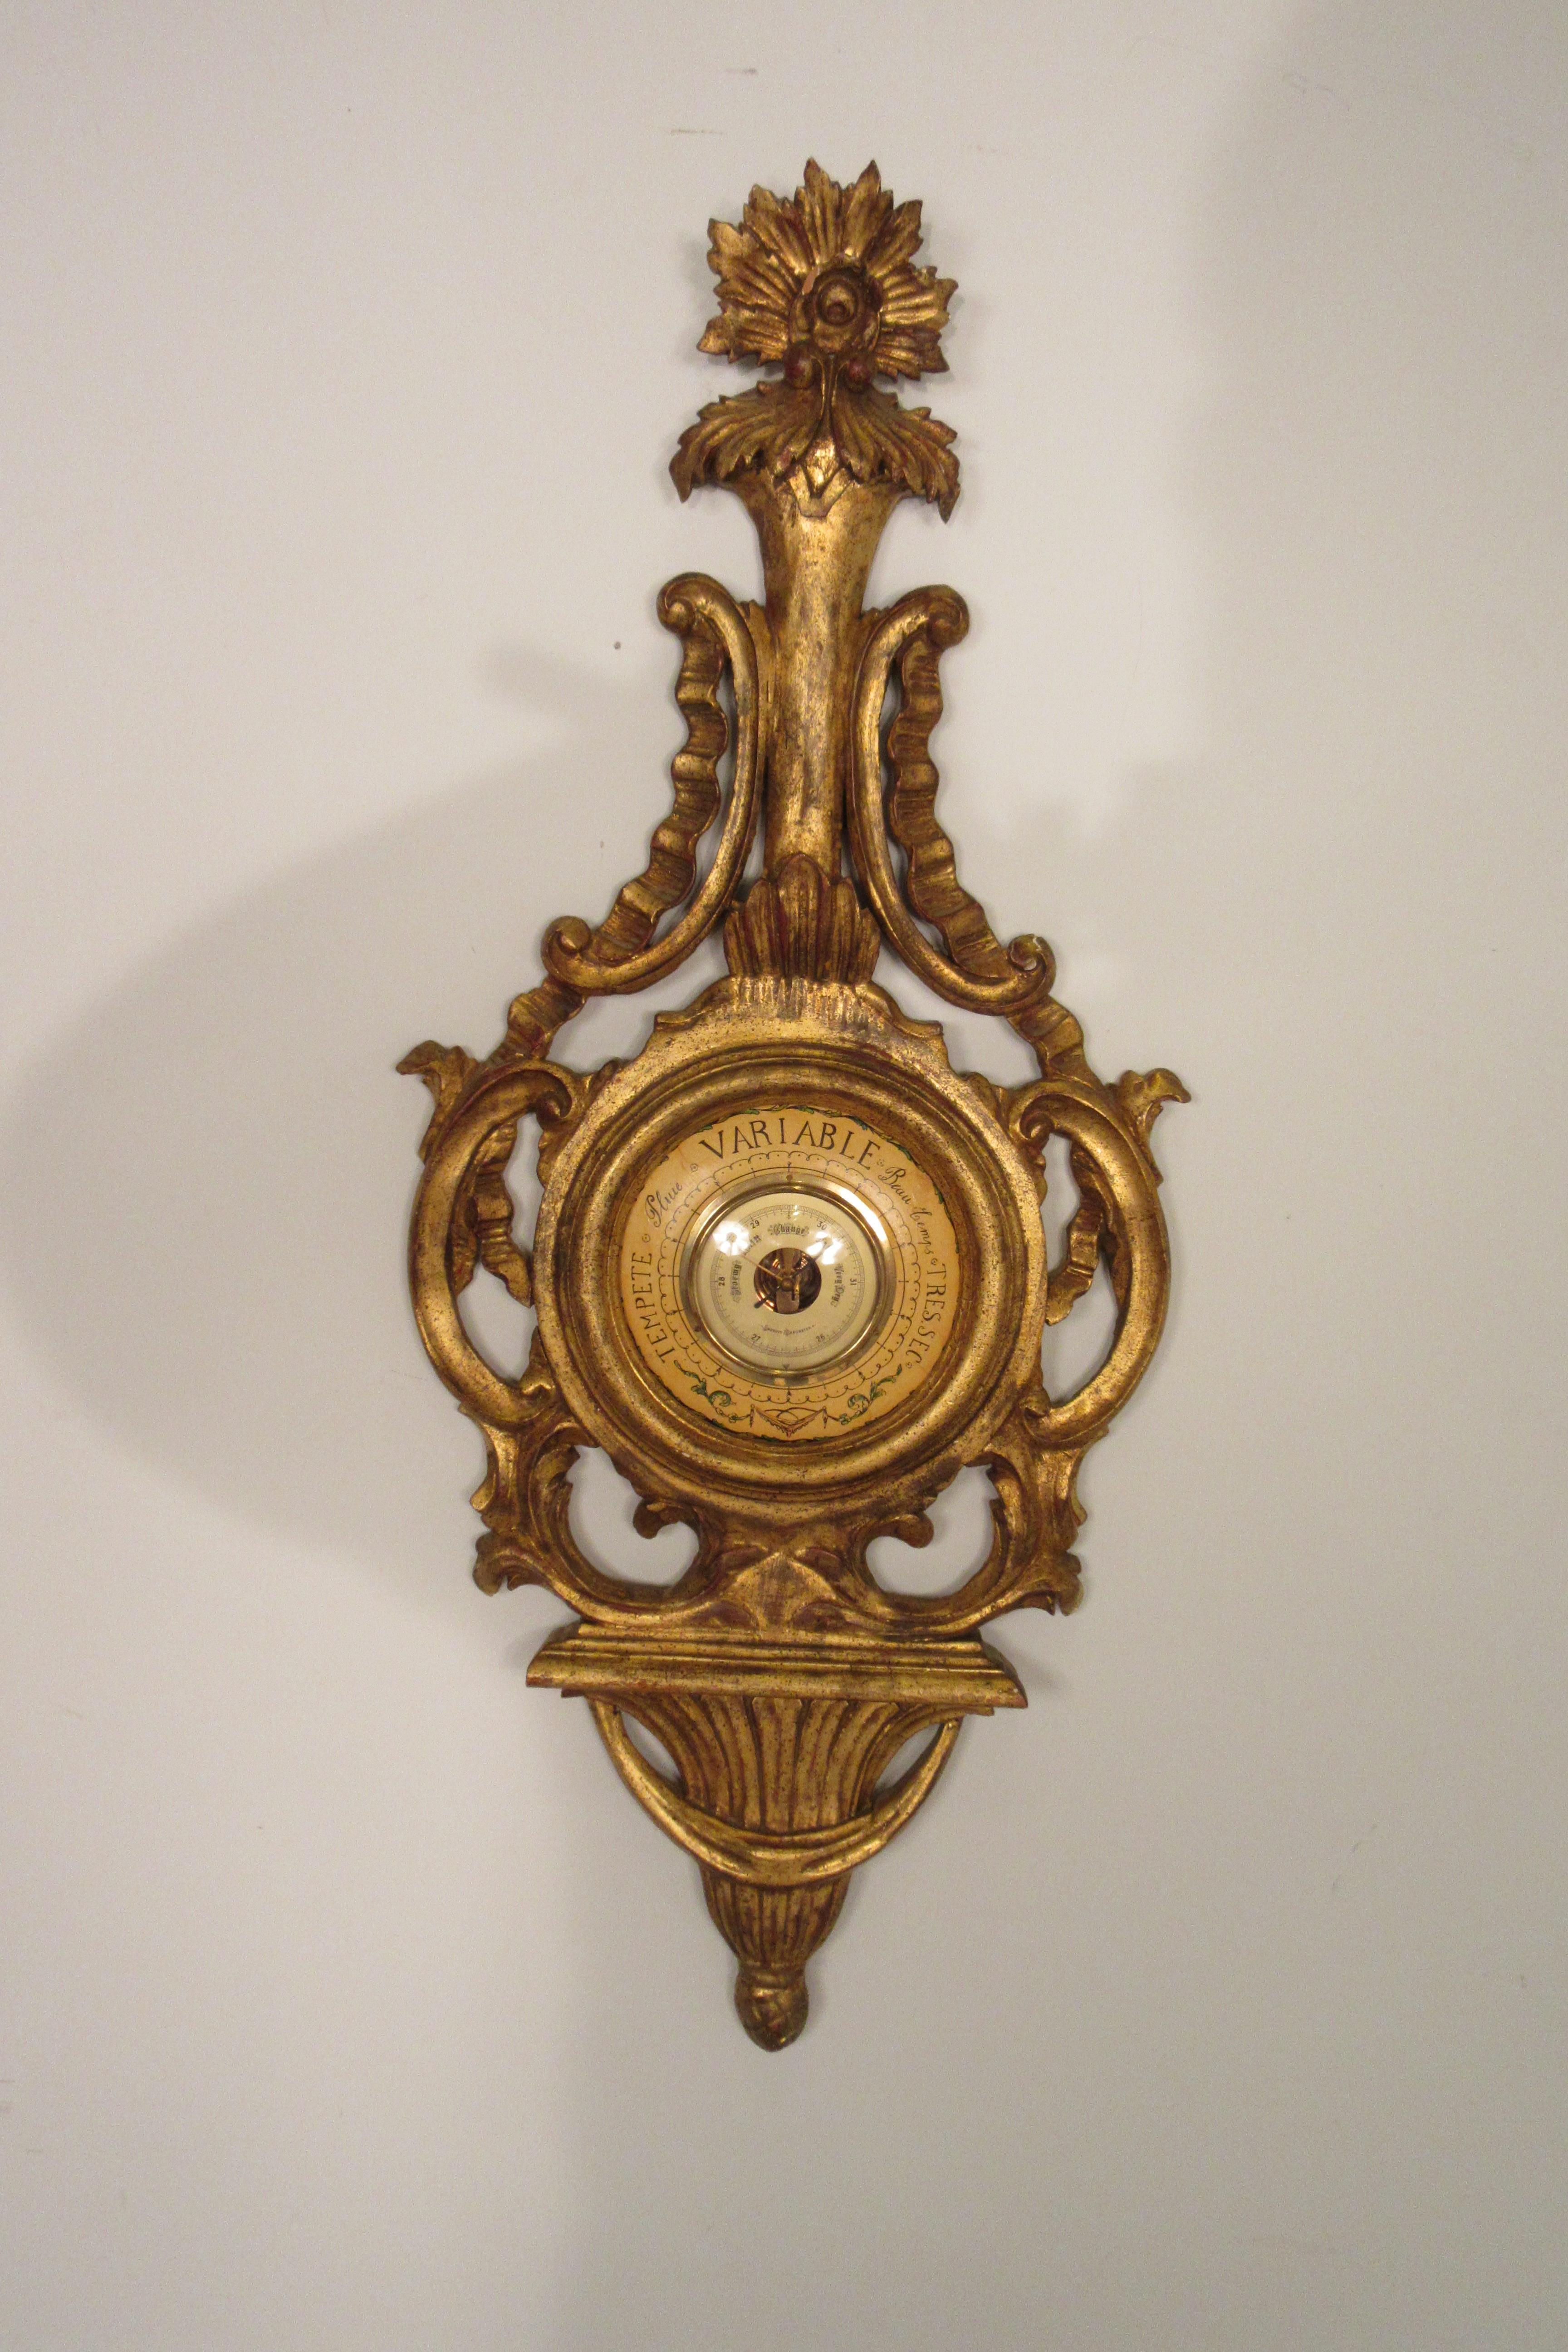 1960s carved wood gilt Italian barometer. I assume the barometer does not work, I haven’t tested it.